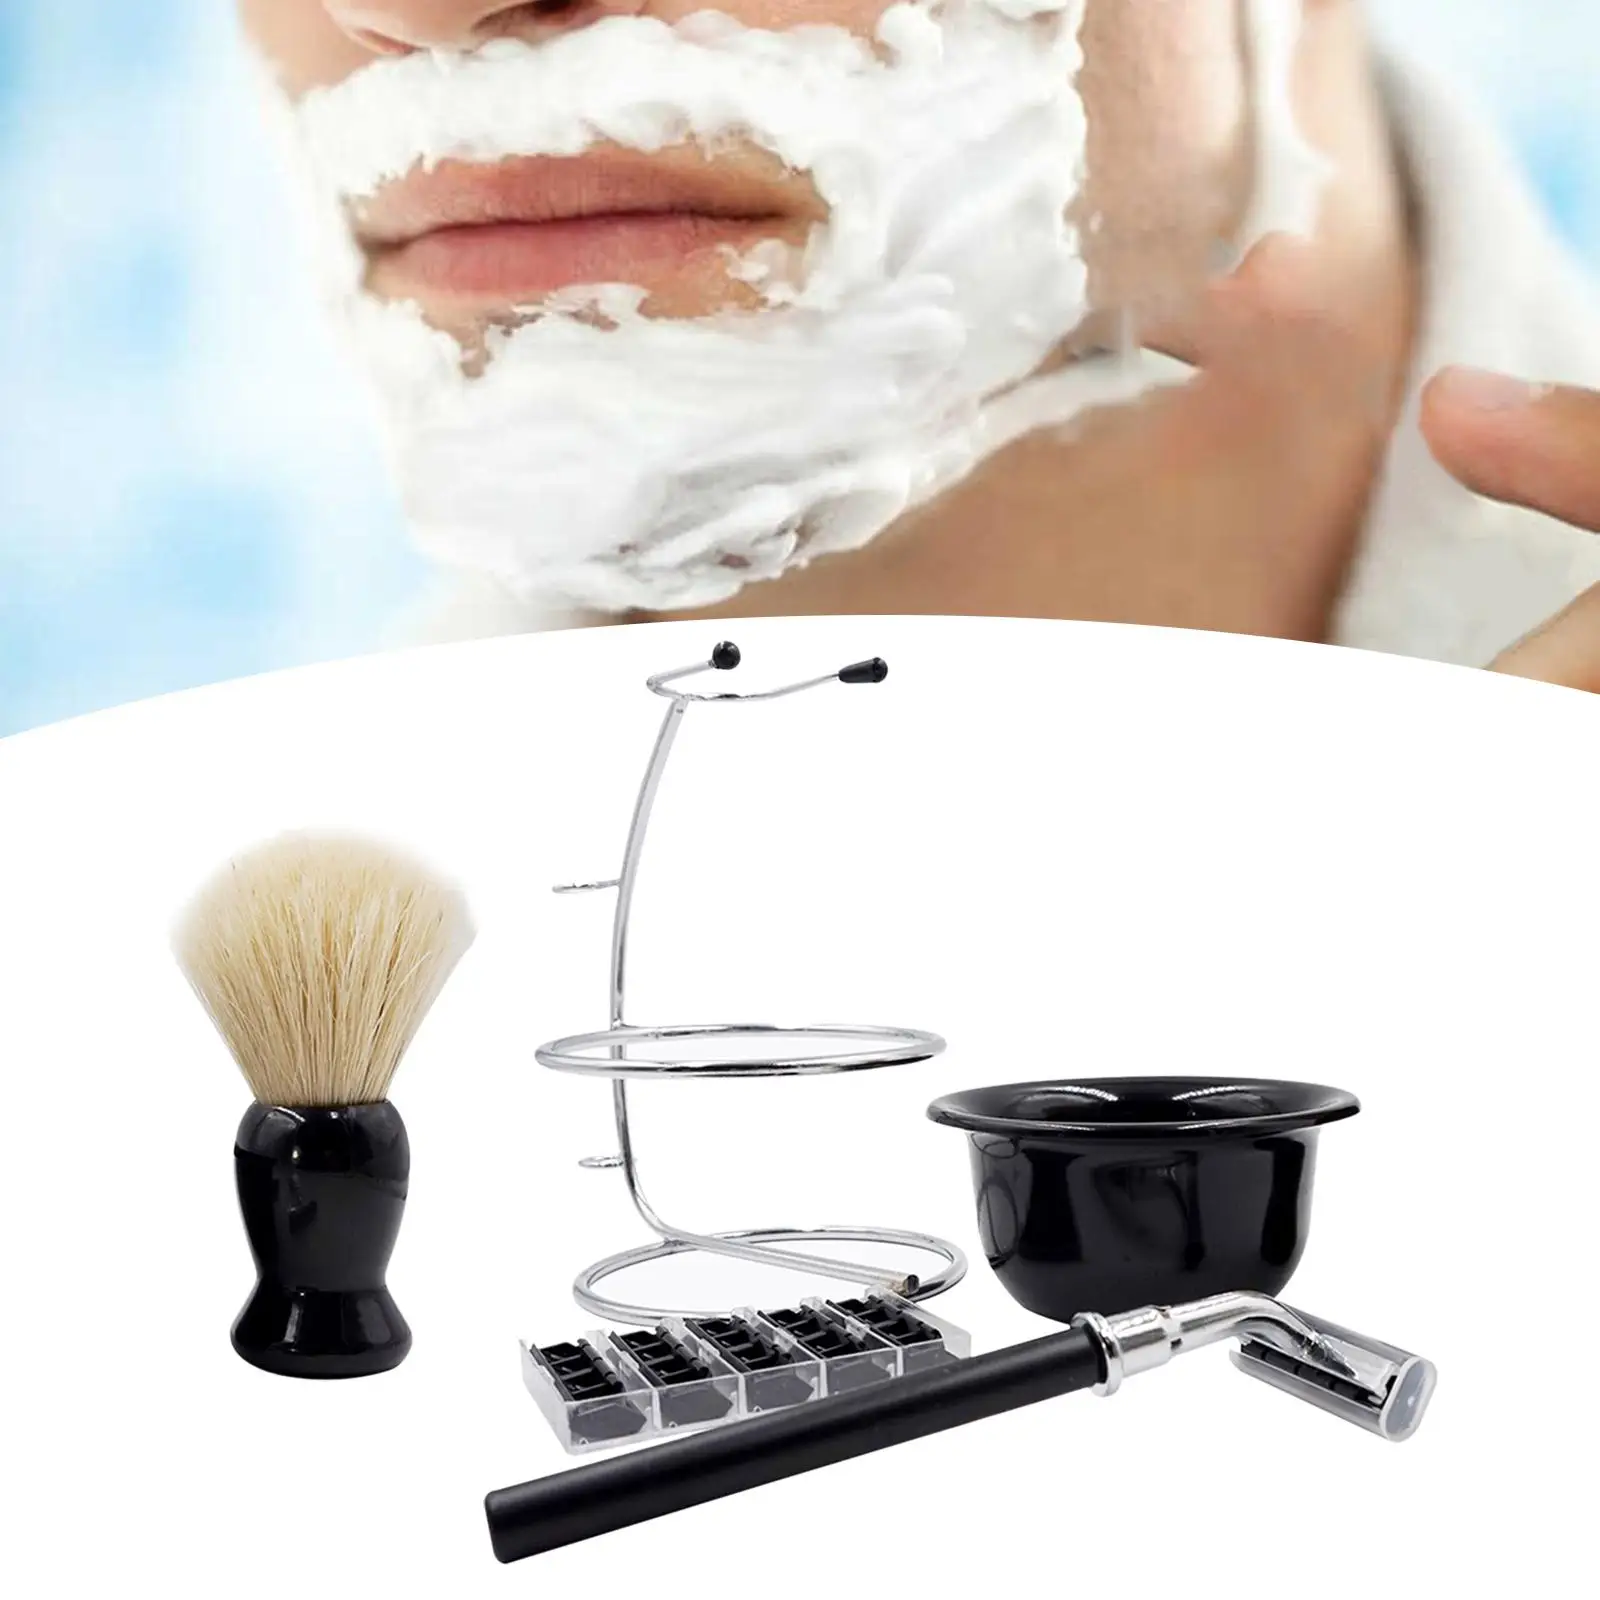 Men Shaving Set Manual Stand Brush Bowl Set Sturdy Solid Durable Accessories Stainess Steel Holder Professional Elegant